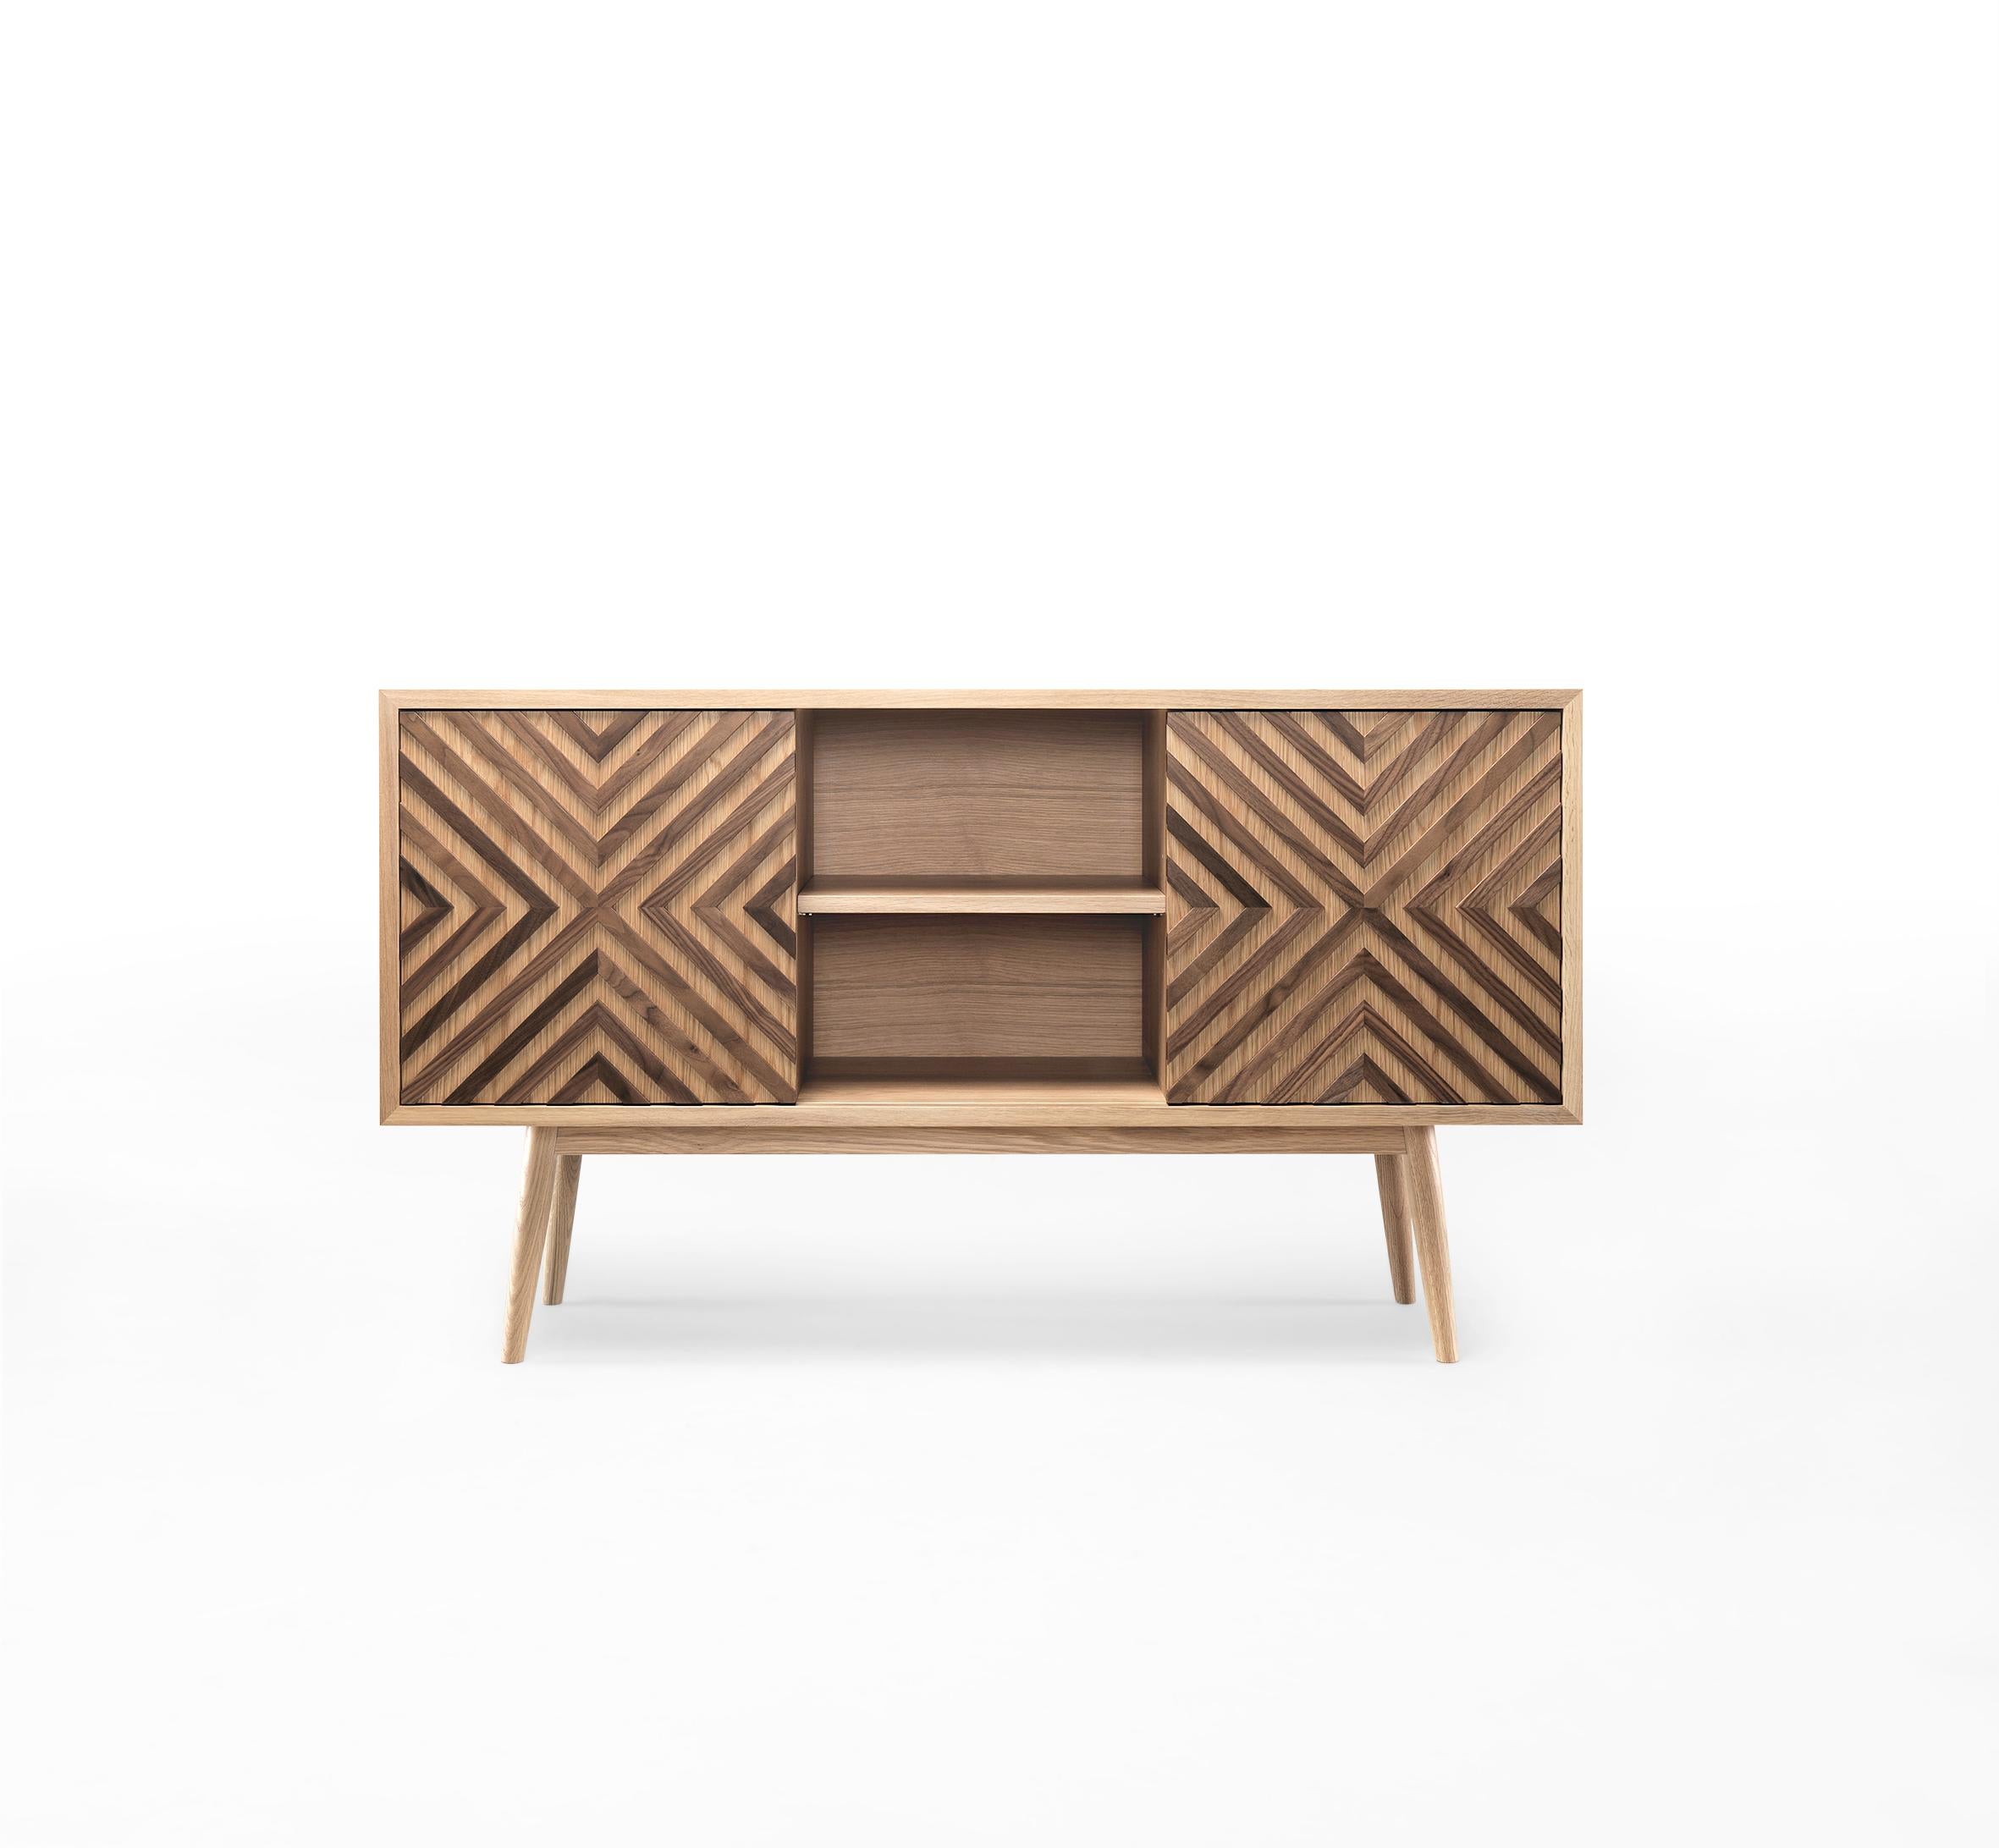 Very elegant sideboard all in solid wood piece.
The details in the doors are in oak and walnut.
Two cupboards, two drawers and on open space with adjustable shelves.
Packed in a plywood box.